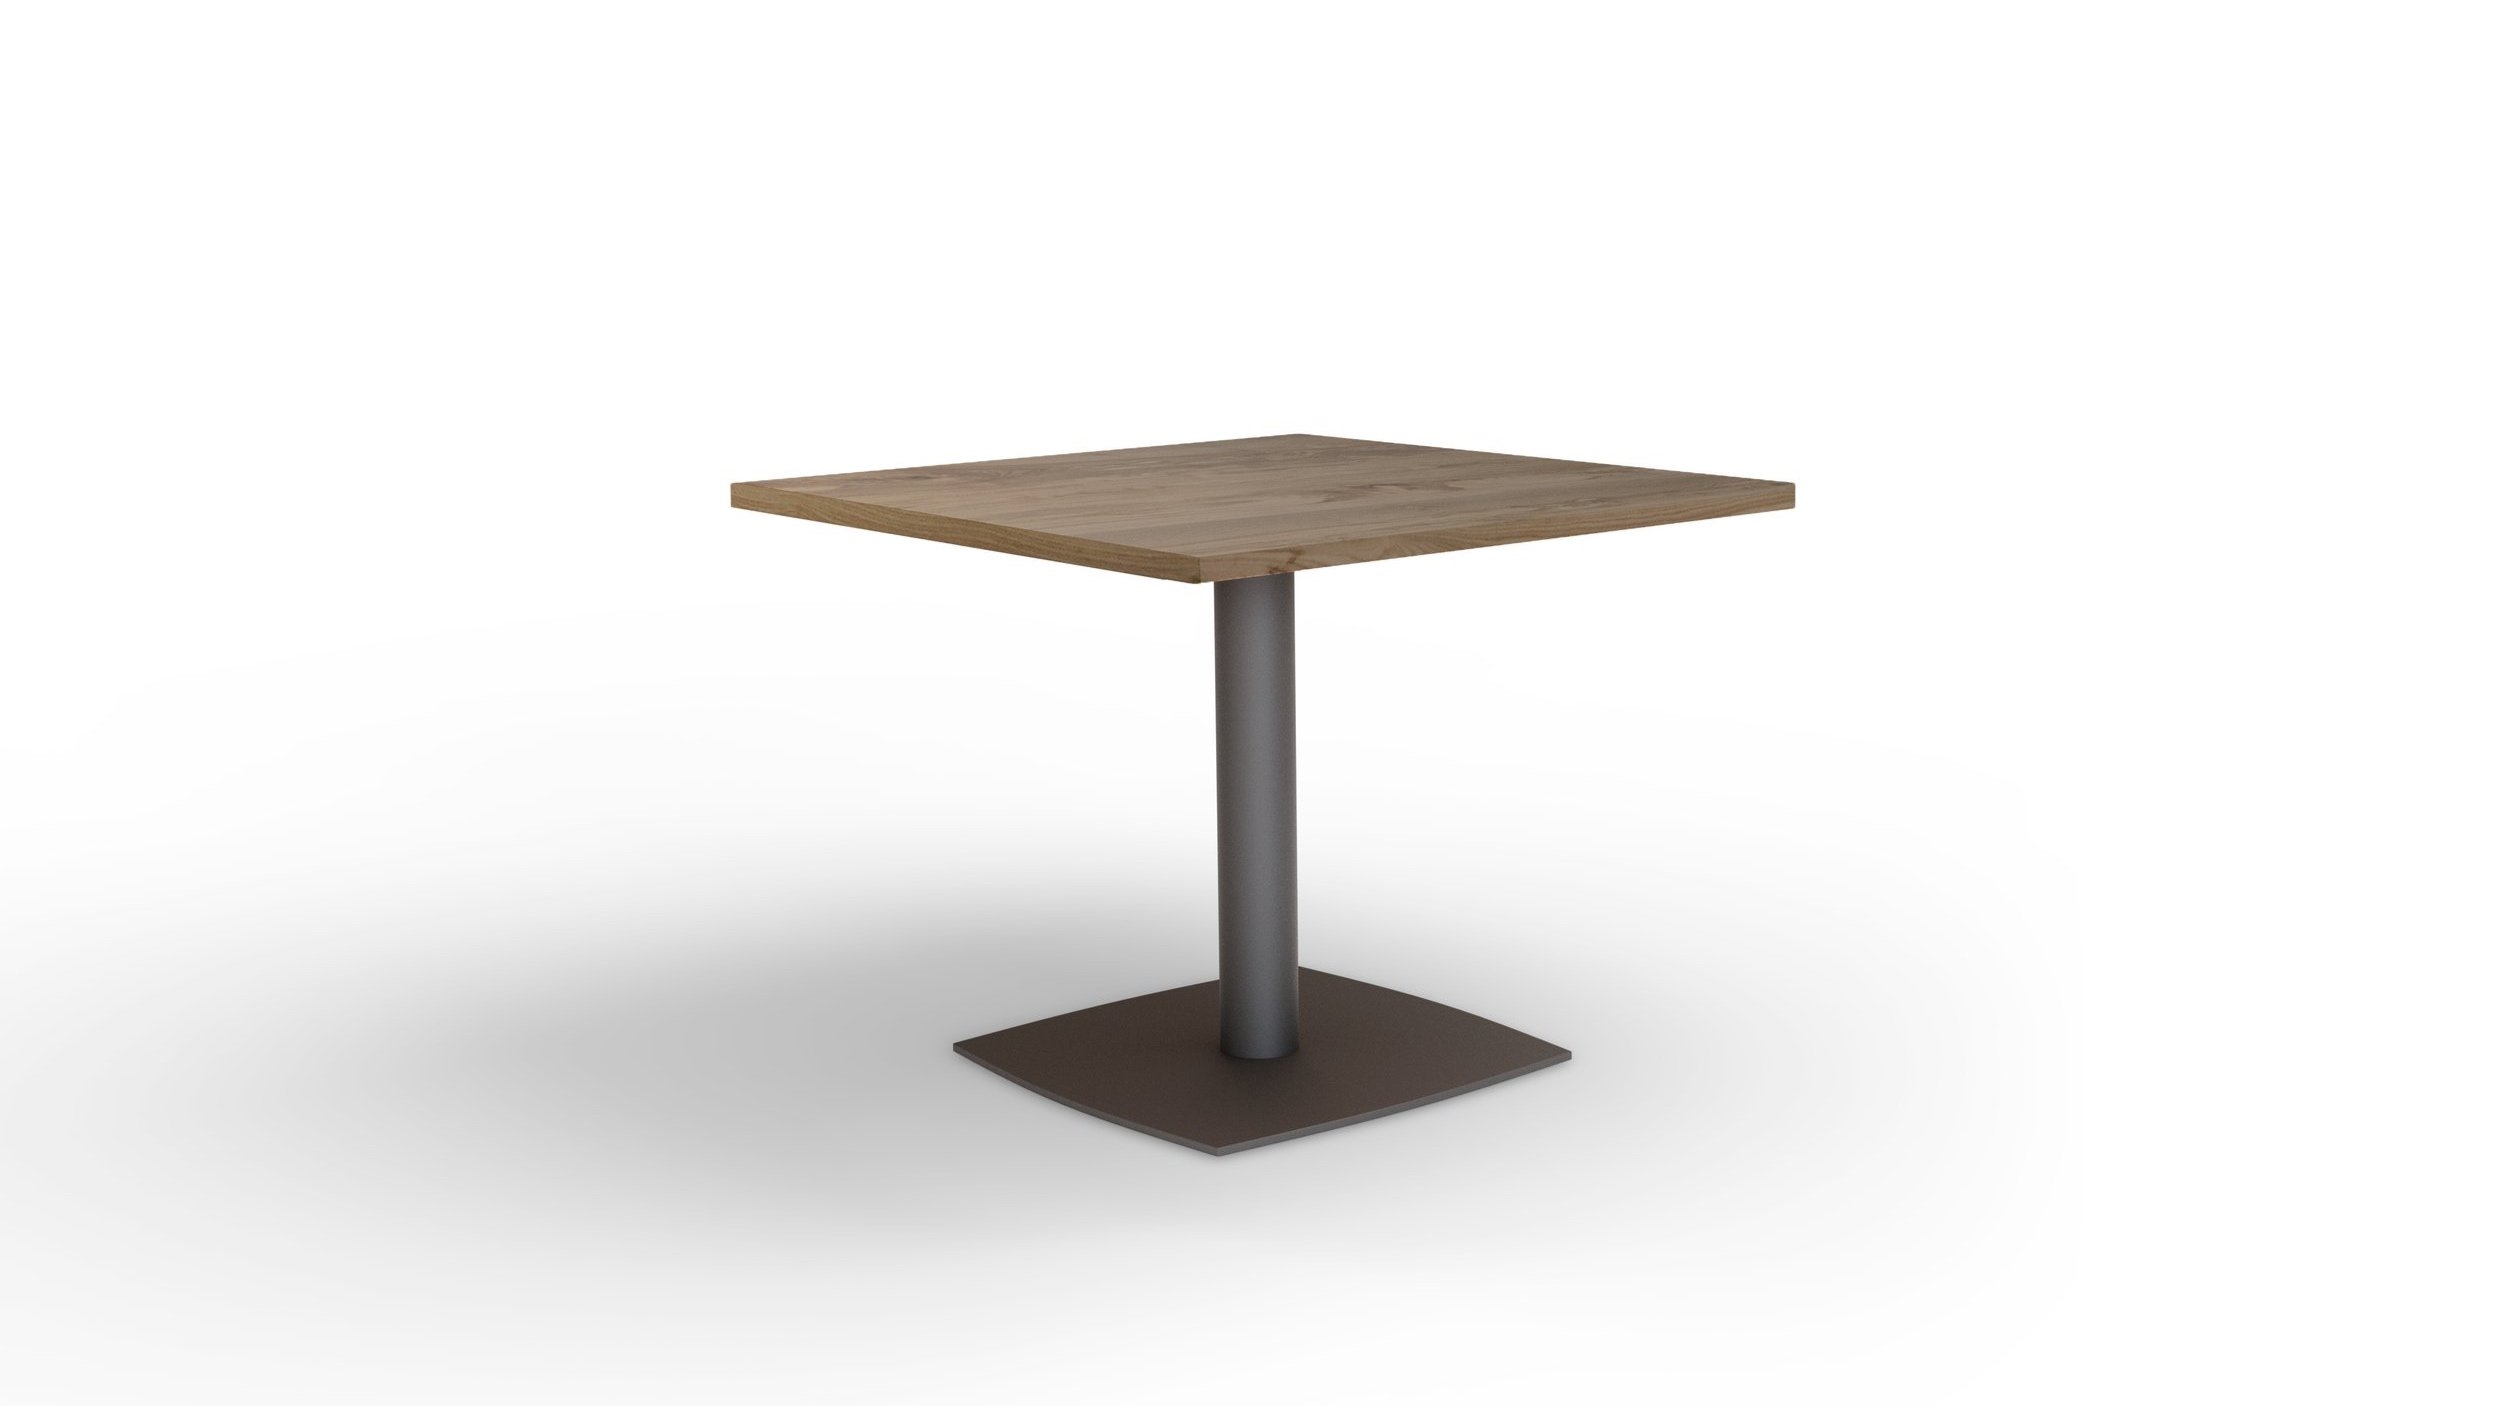 VERSION WITH 36” PLANKED SQUARE WALNUT TOP IN CLEAR FINISH; BASE IN BLACK FINISH